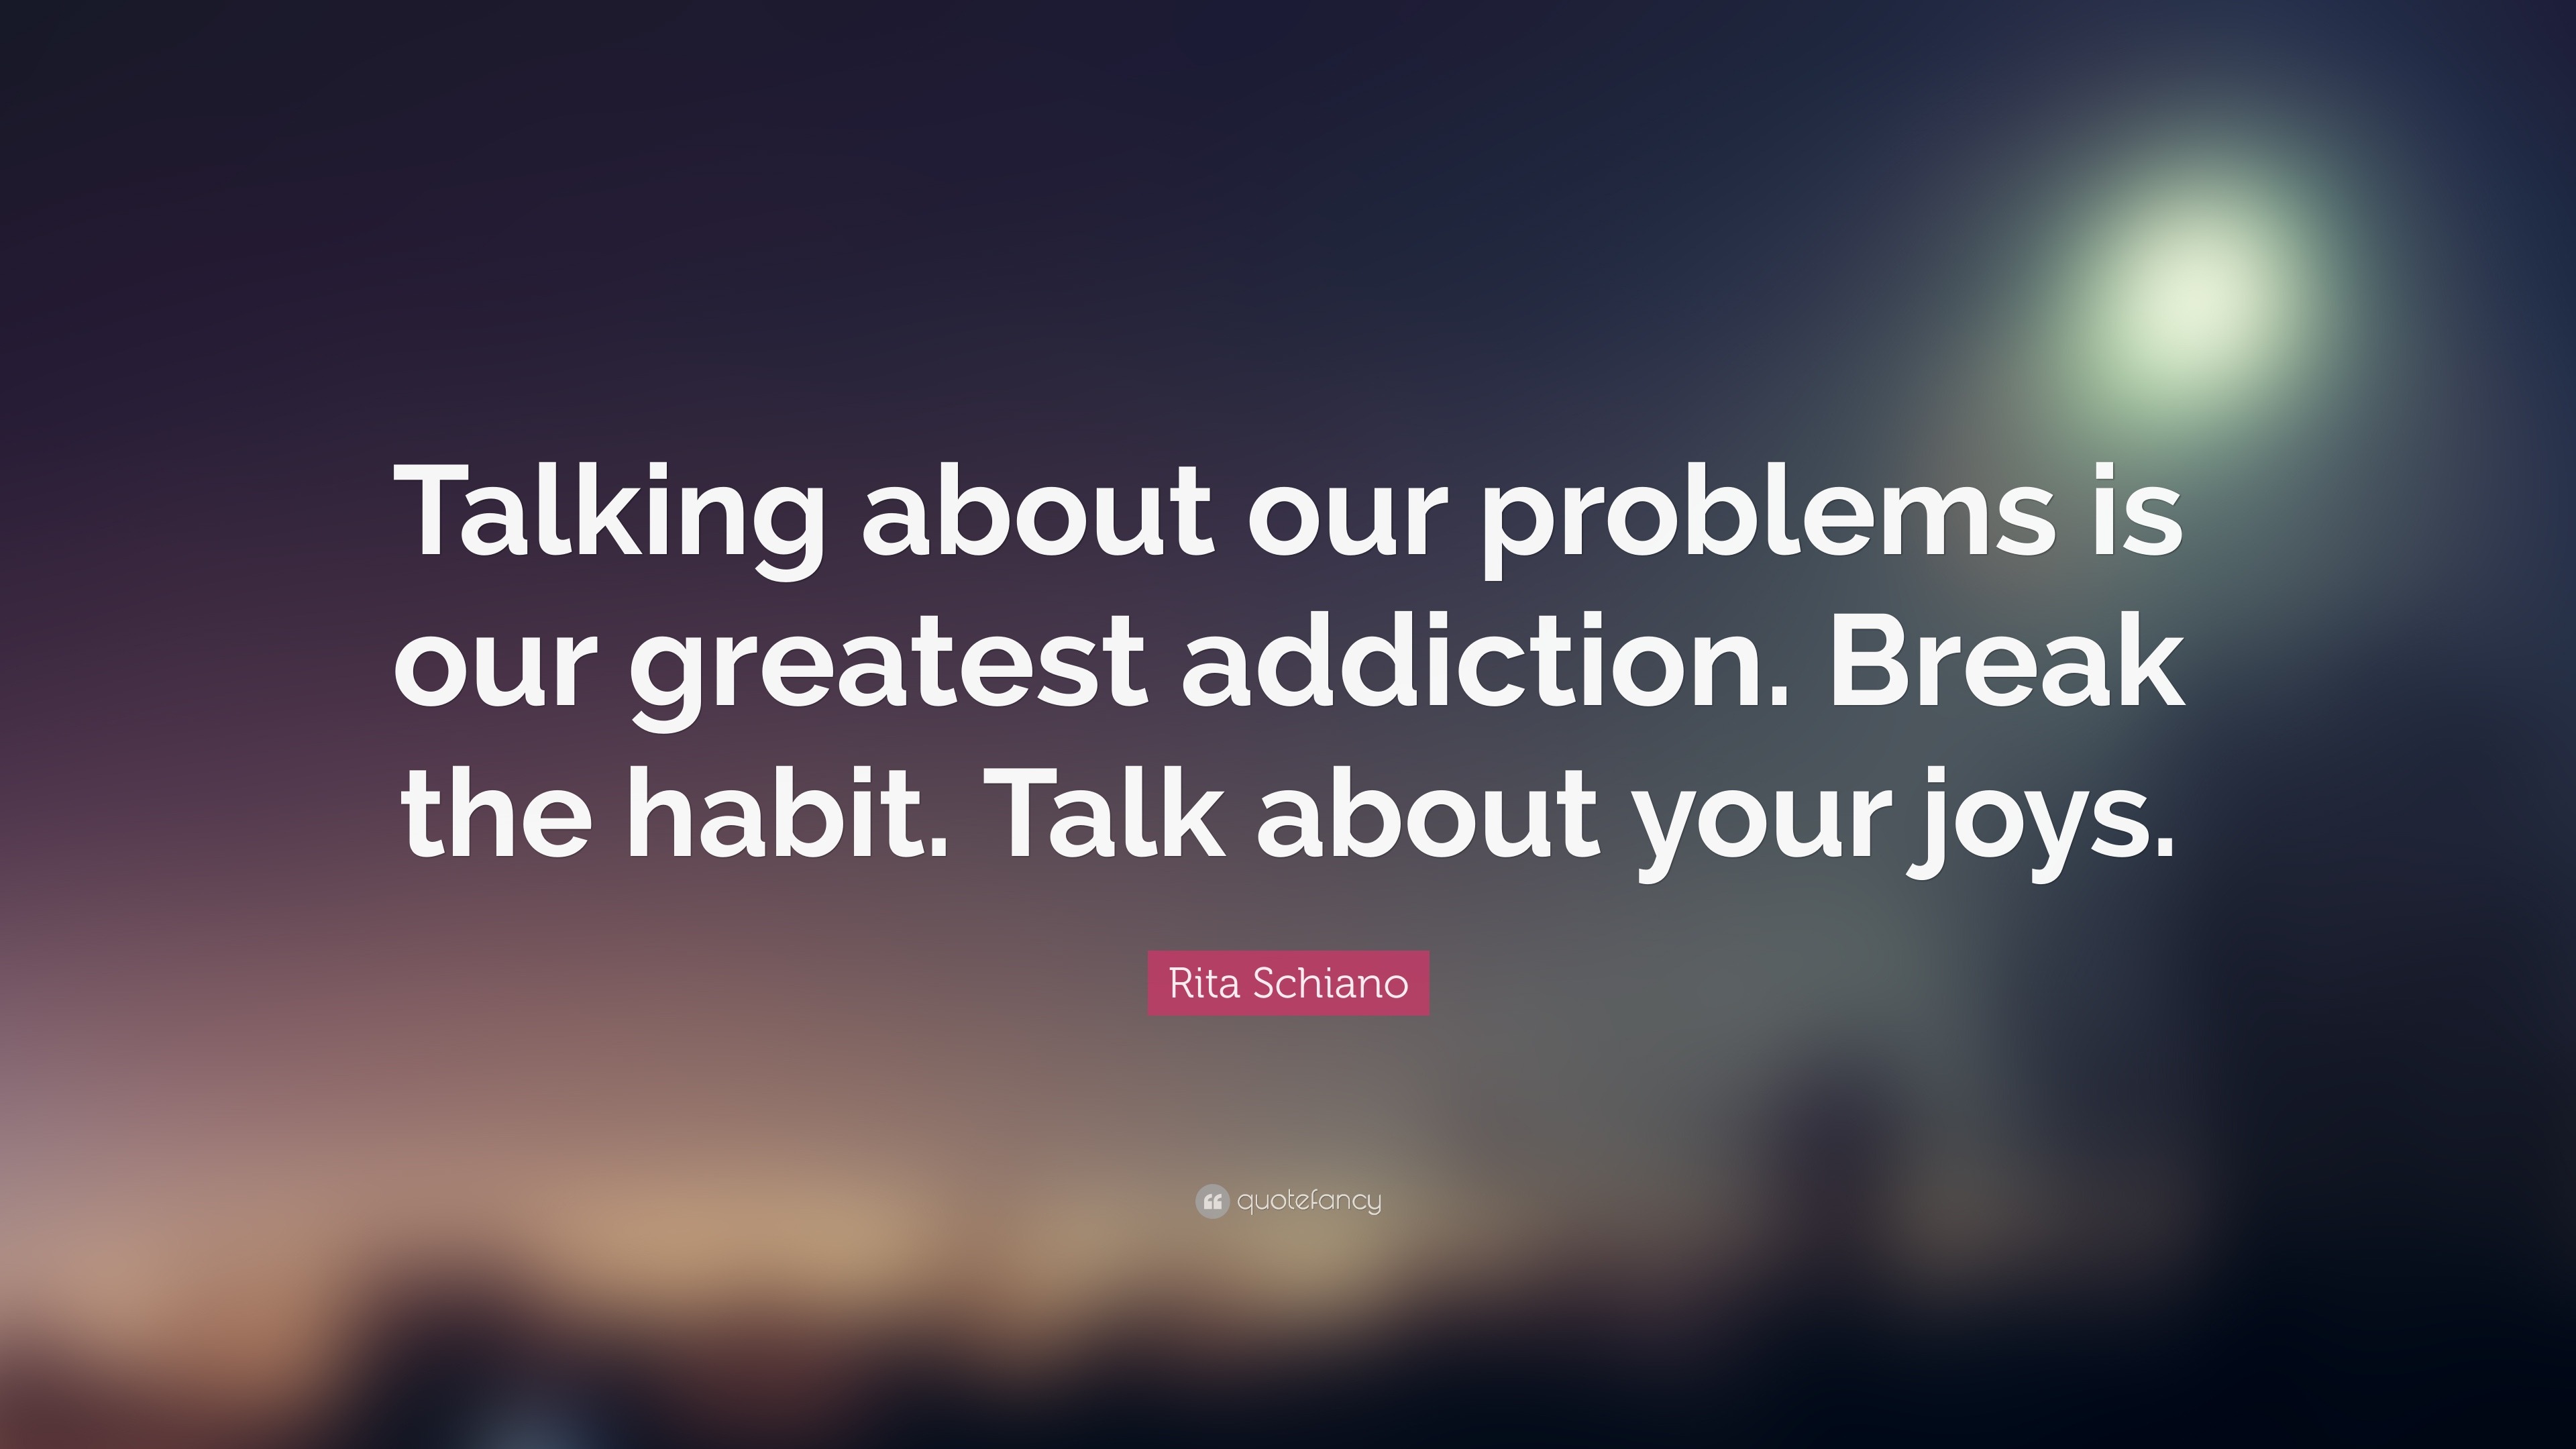 Rita Schiano Quote: “Talking about our problems is our greatest